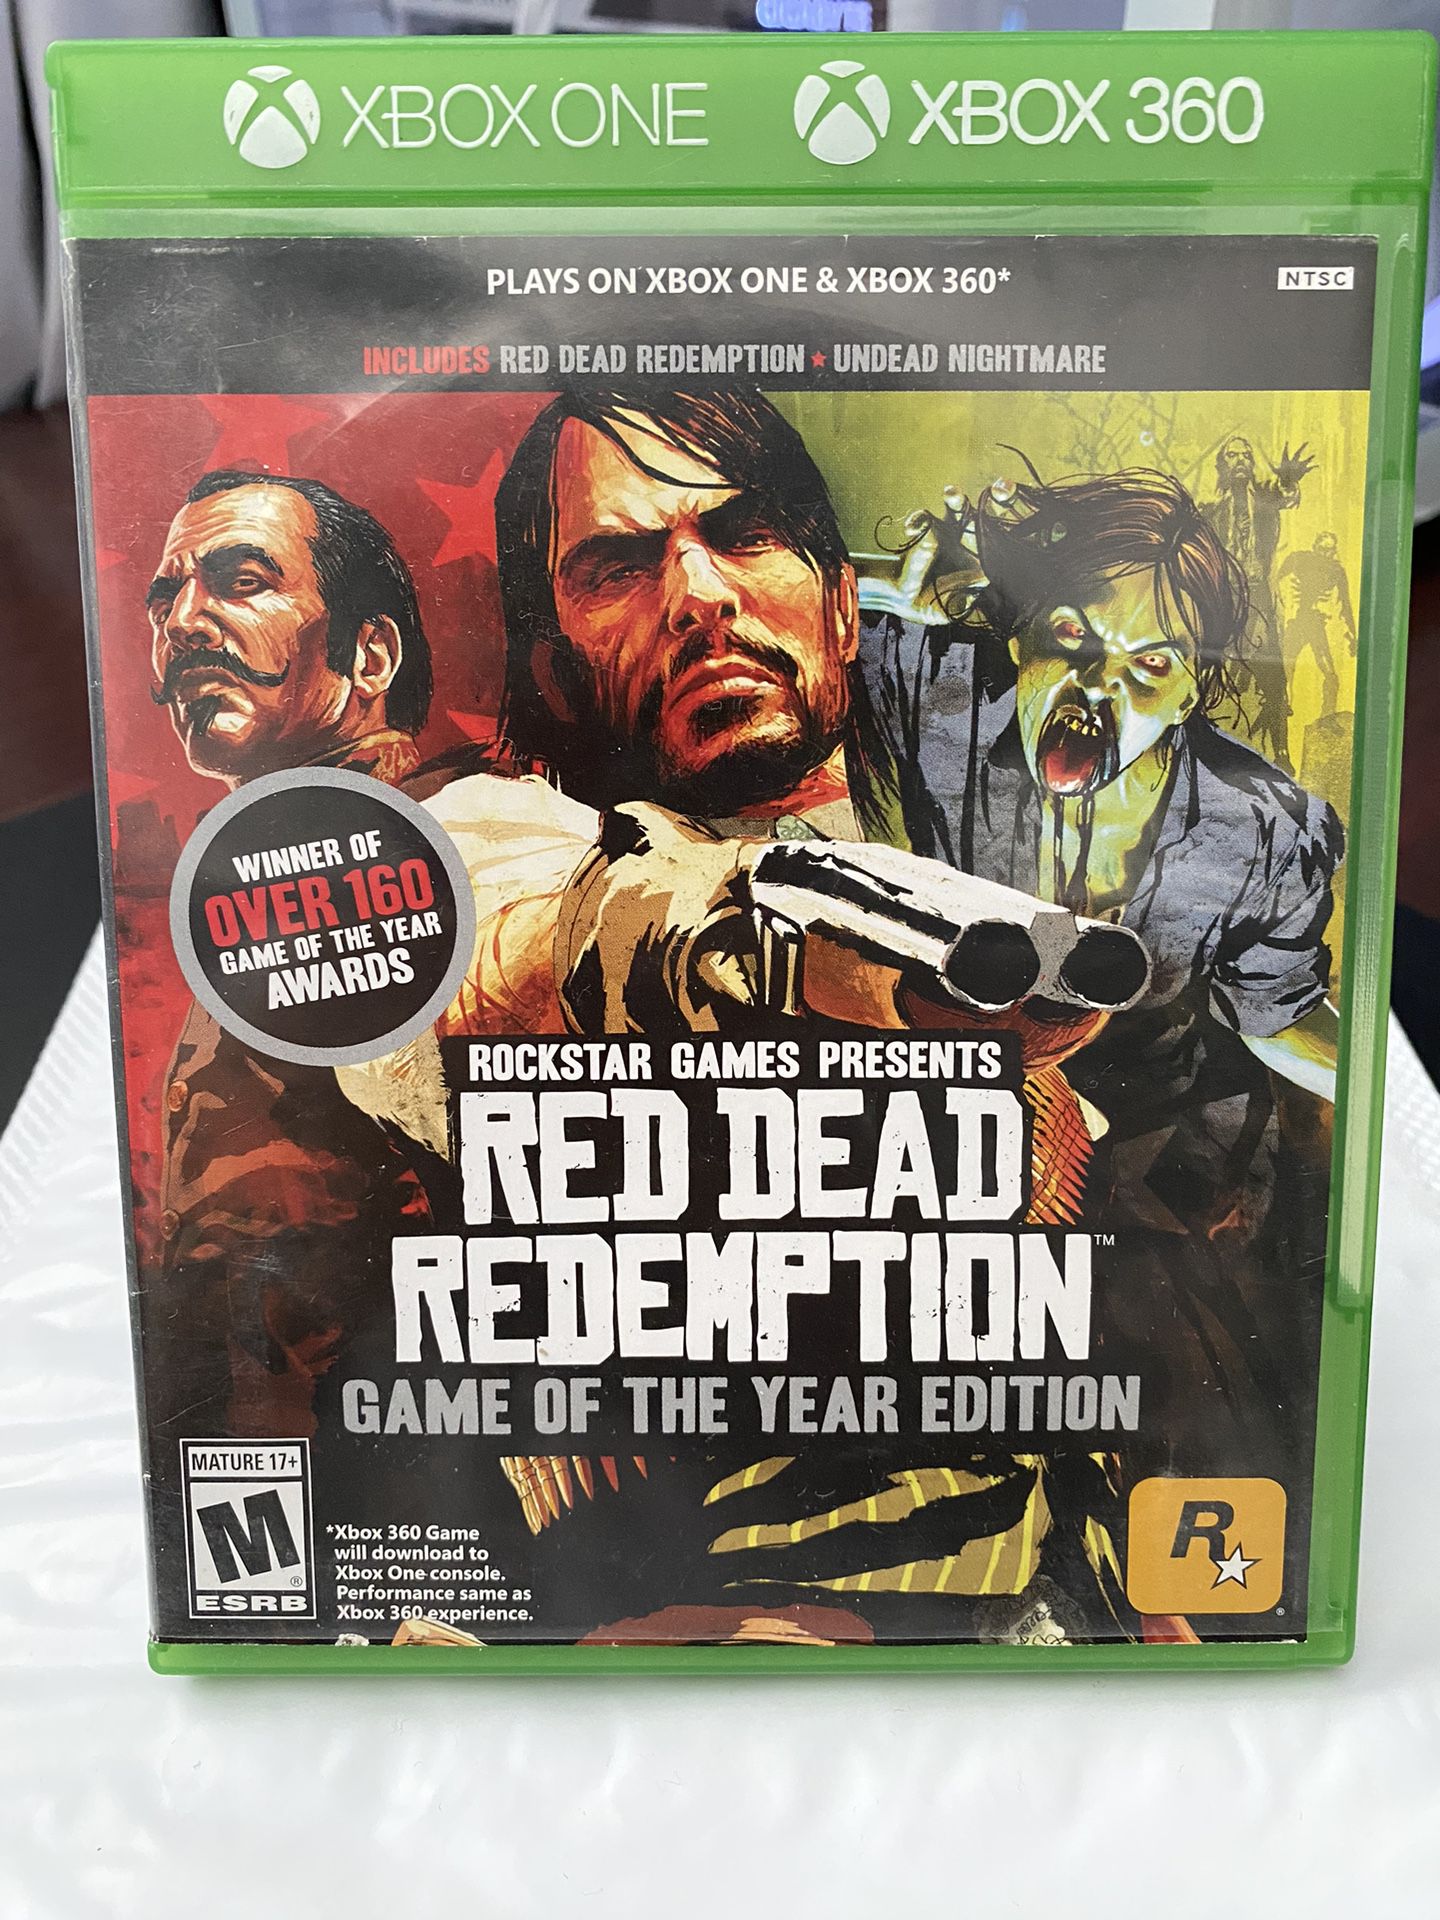 RED DEAD REDEMPTION GAME OF THE YEAR EDITION “XBOX Sale in Oro Valley, - OfferUp